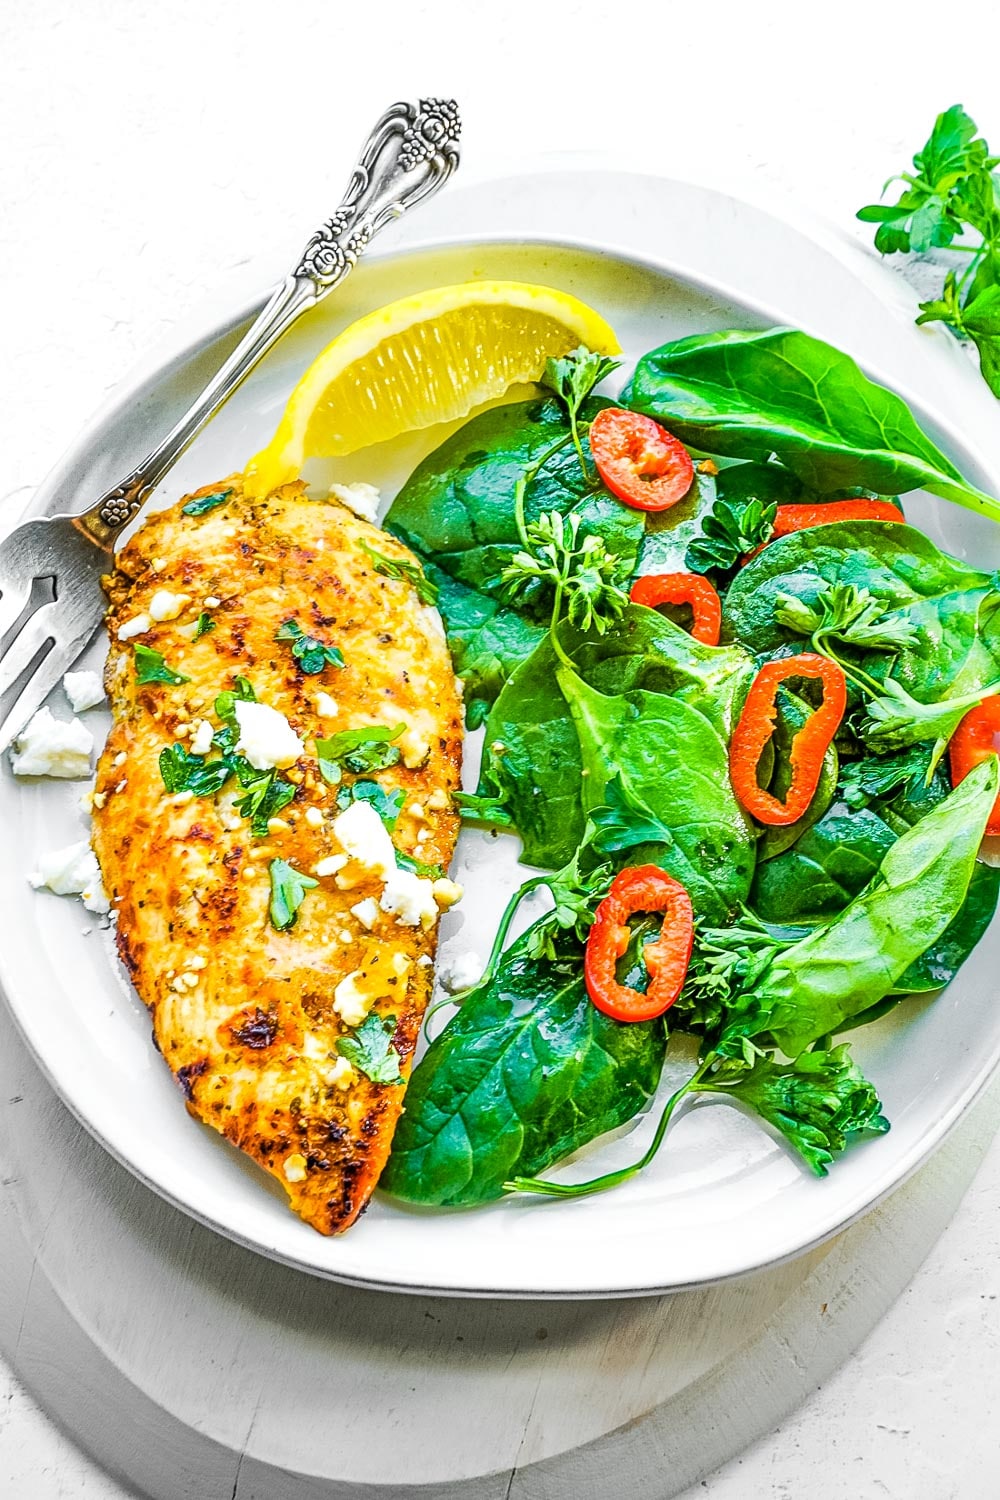 A piece of Greek chicken on a plate with a spinach salad and a lemon wedge.